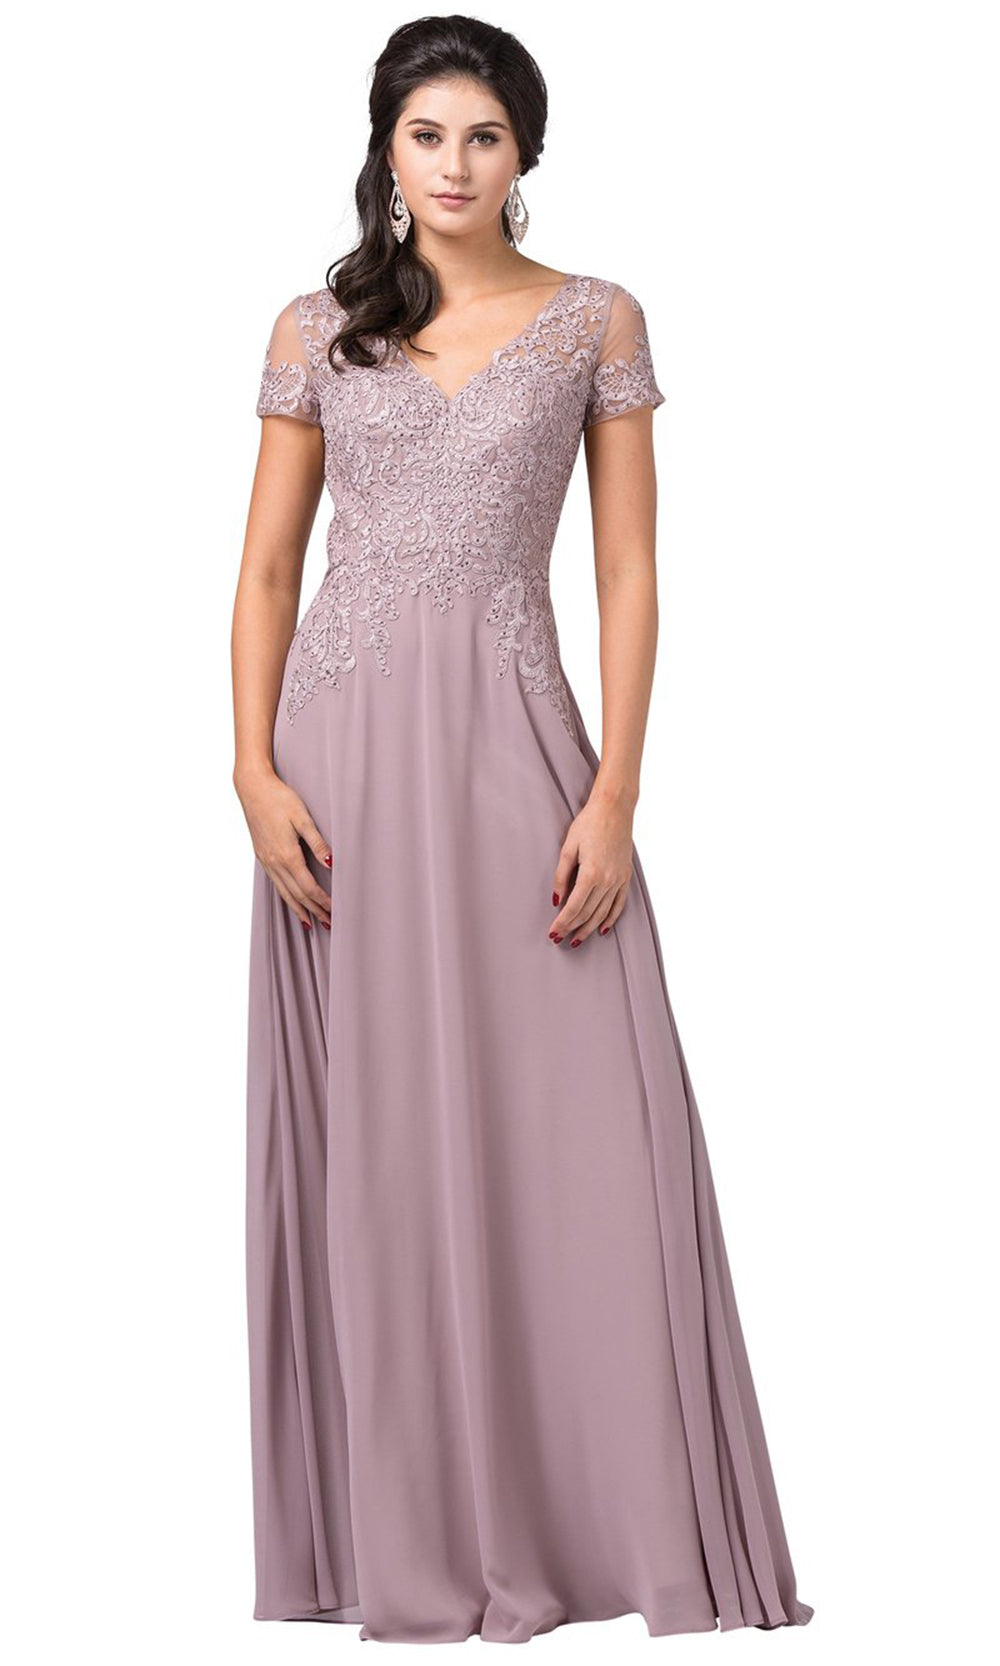 Dancing Queen - 2757 Sheer Short Sleeve Embroidered A-Line Dress In Pink